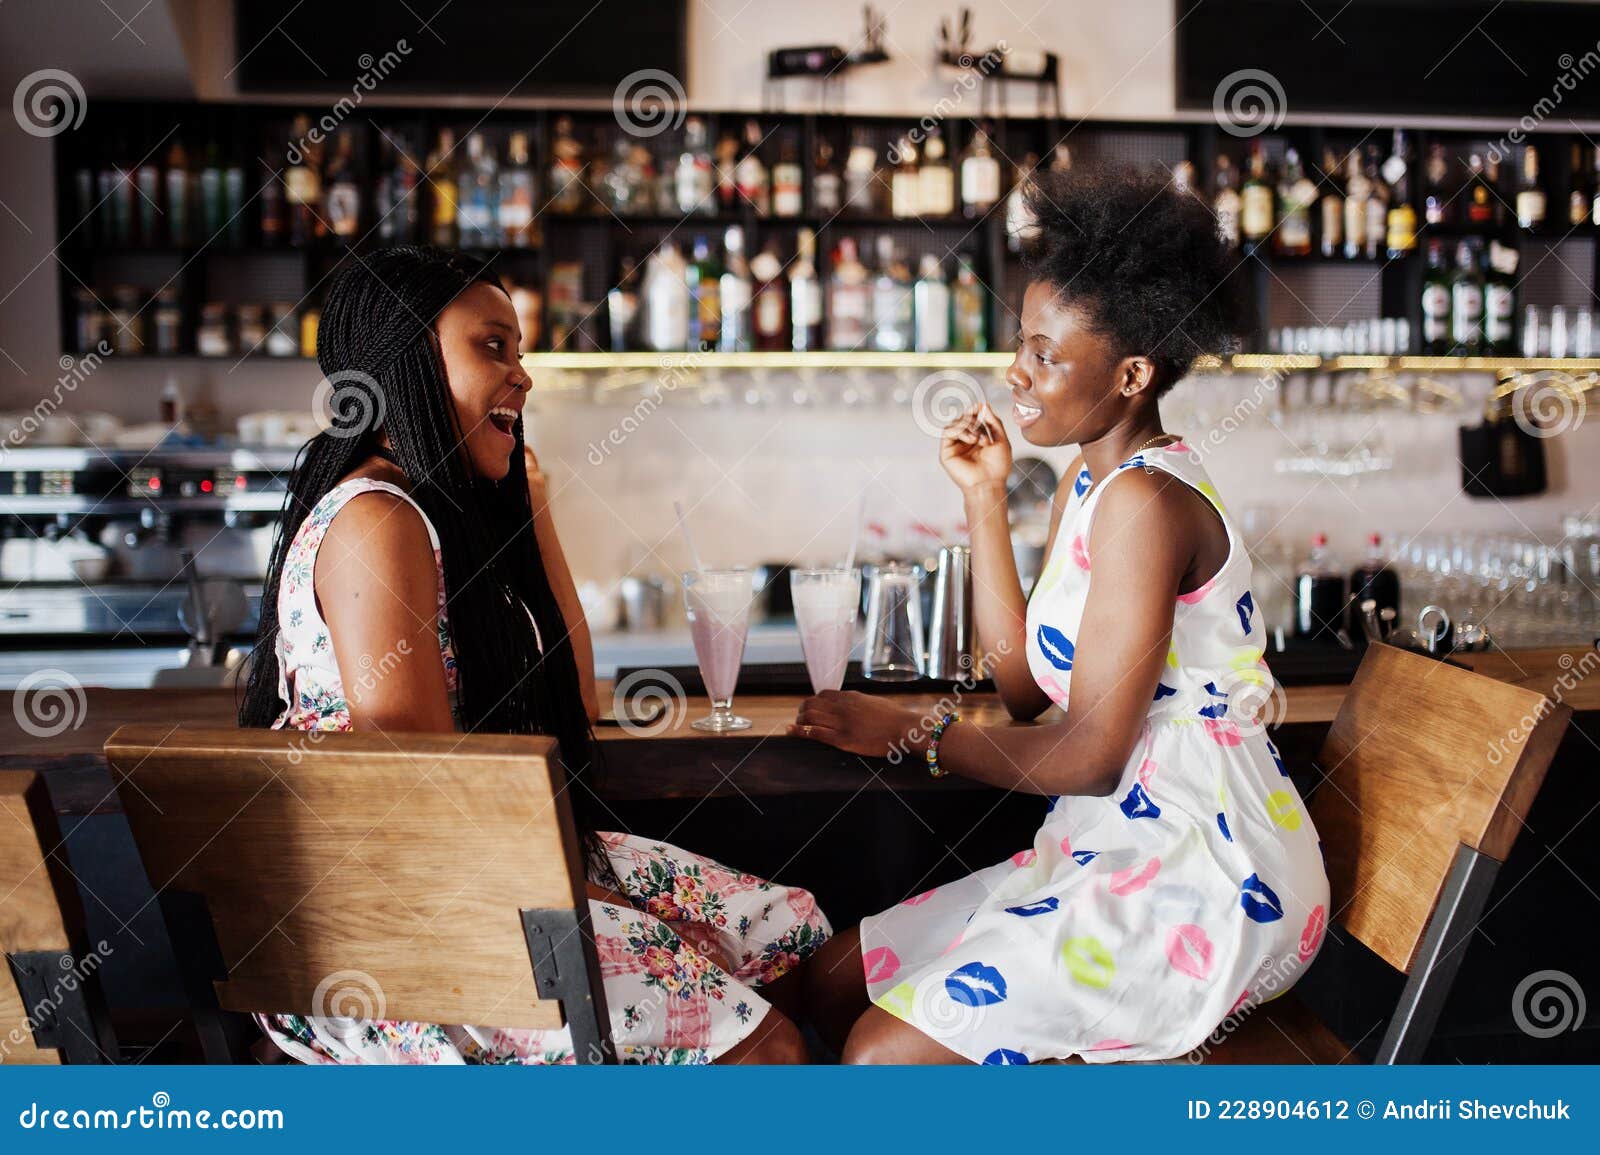 Two Black African Girlfriends at Summer Dresses Posed at Caf image photo